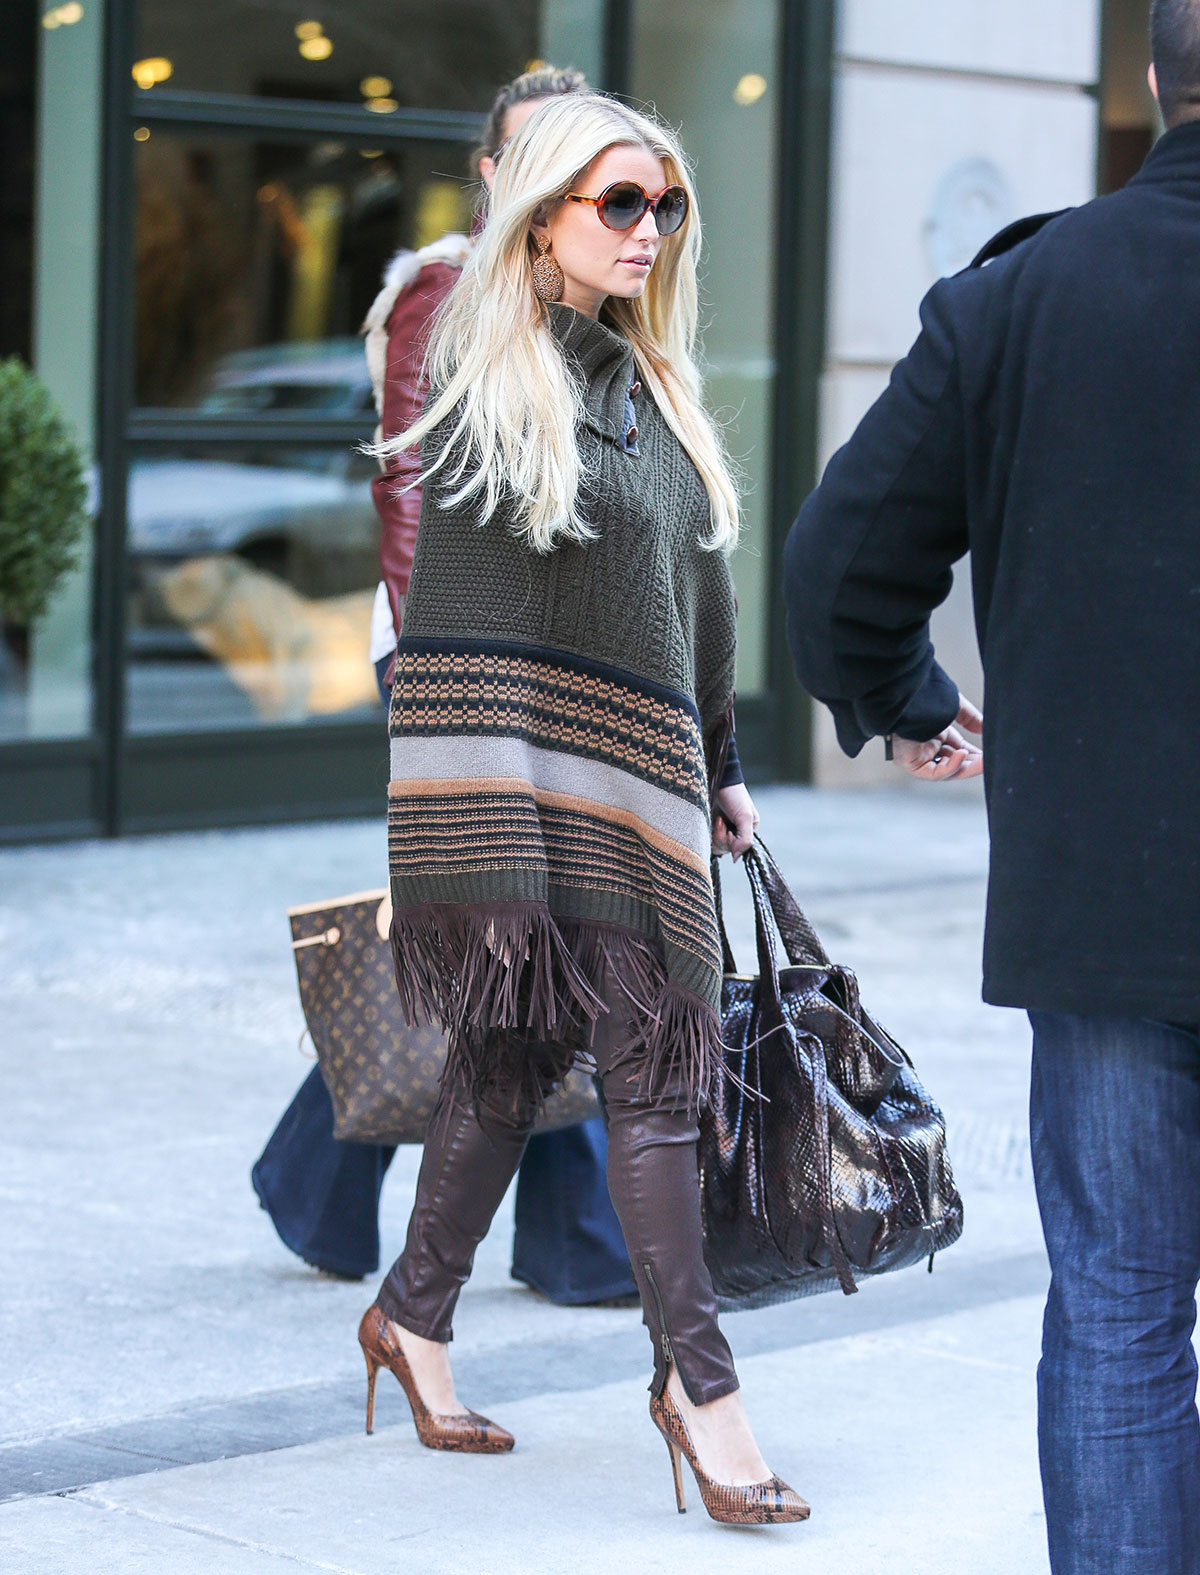 Jessica Simpson leaves JFK airport and arrives at LAX